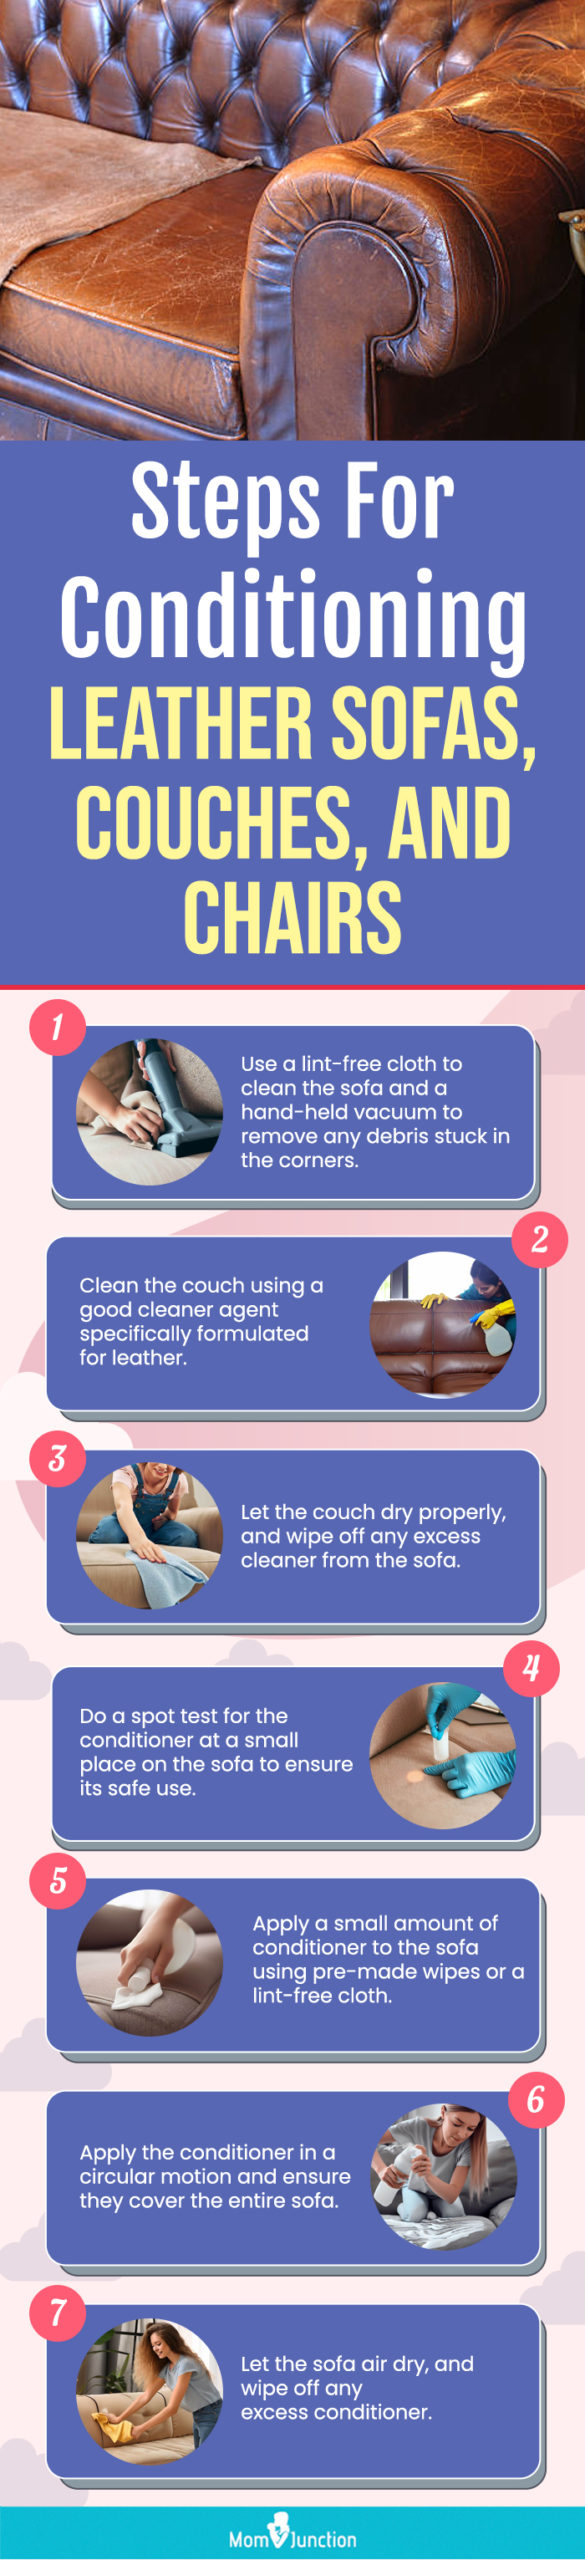 Steps For Conditioning Leather Sofas, Couches, And Chairs (infographic)